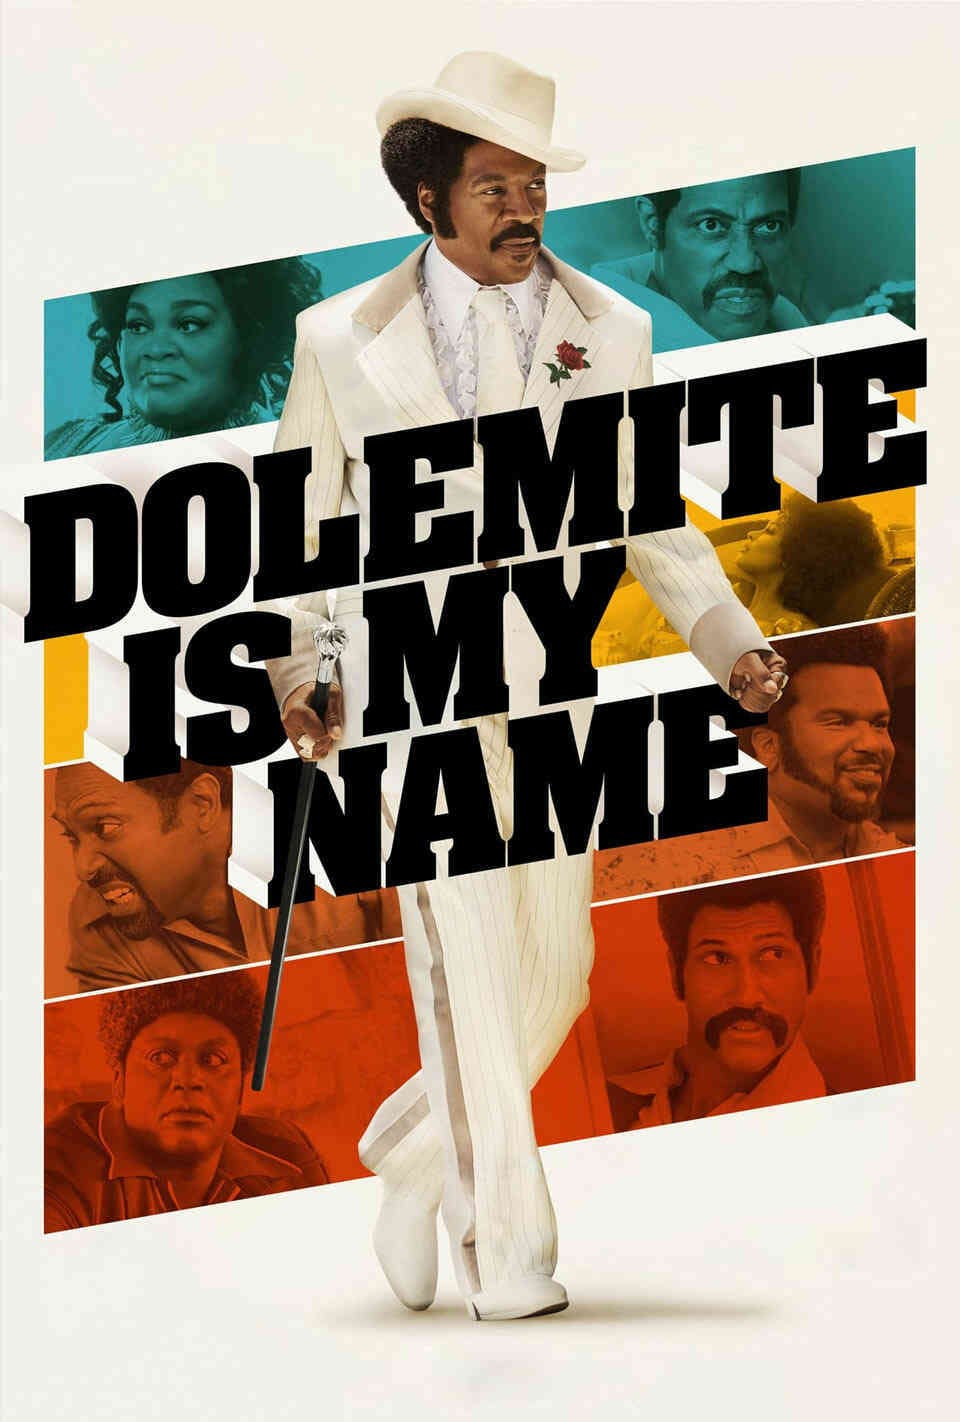 Read Dolemite Is My Name screenplay (poster)